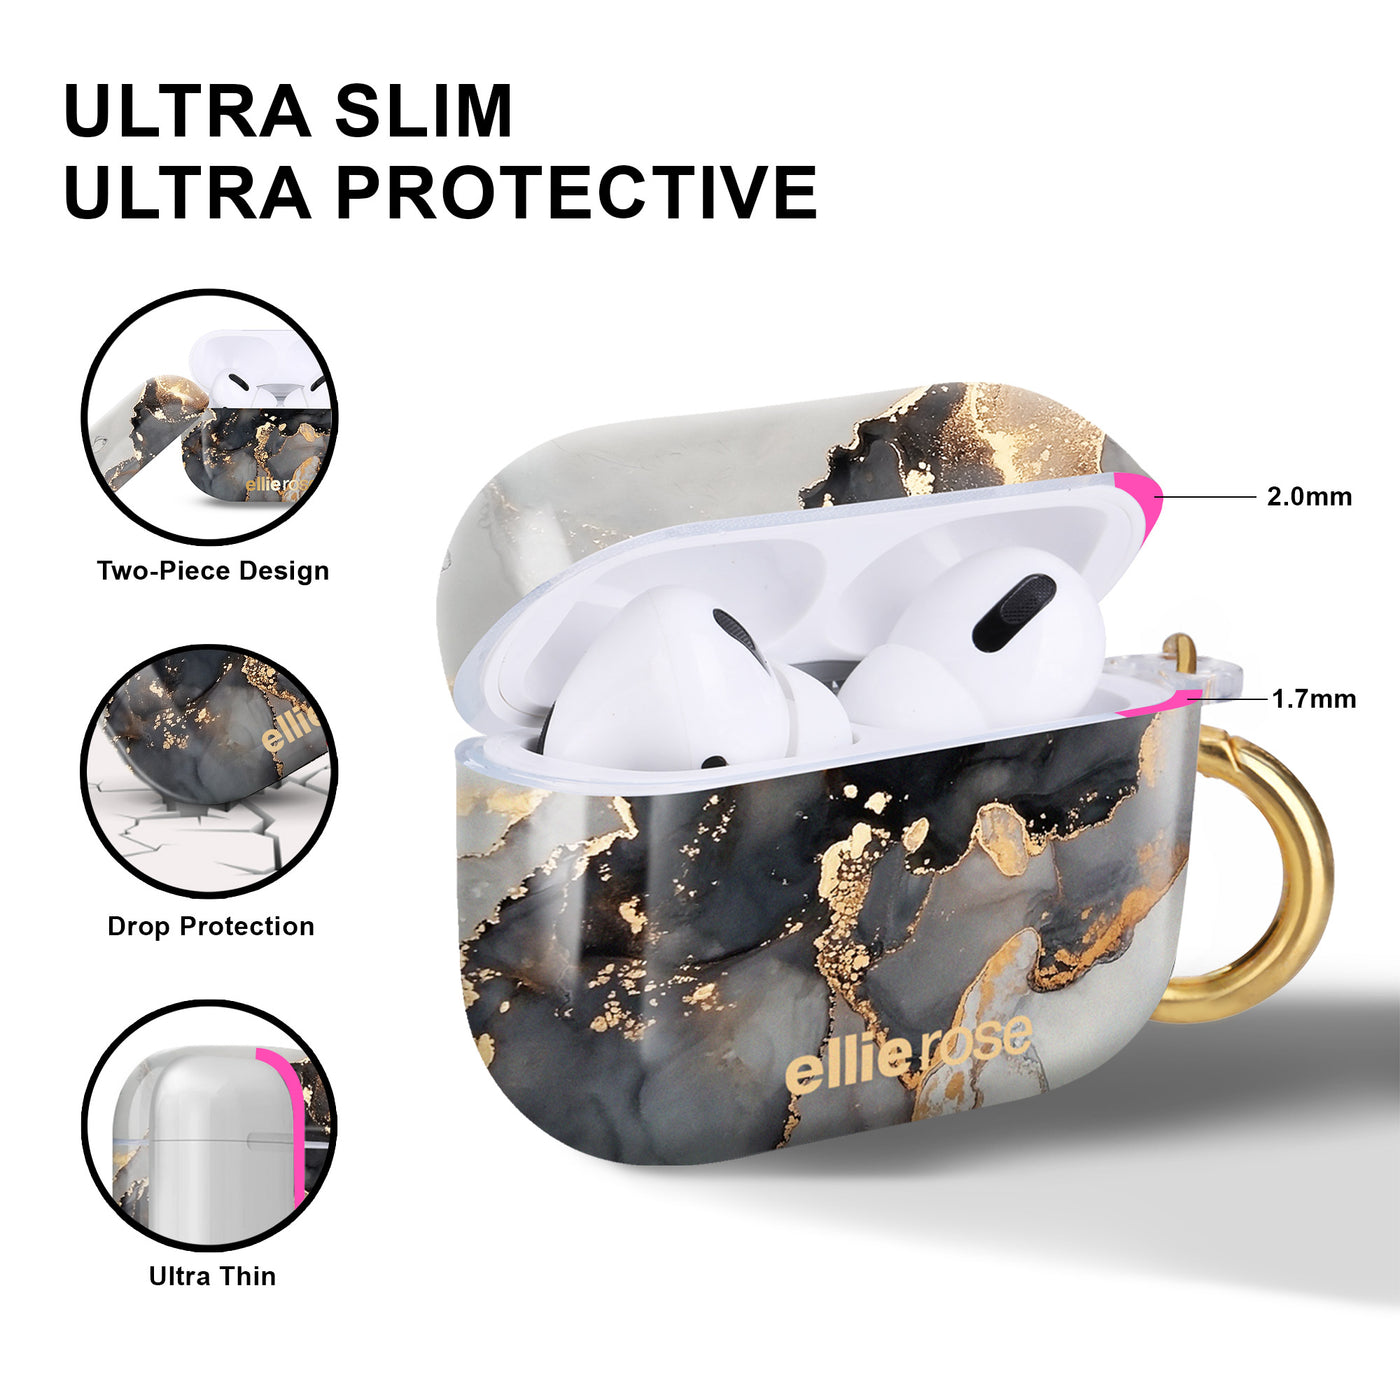 Ultra slim, ultra protective, two piece design and drop protection Mercury Marble Airpods Pro Case